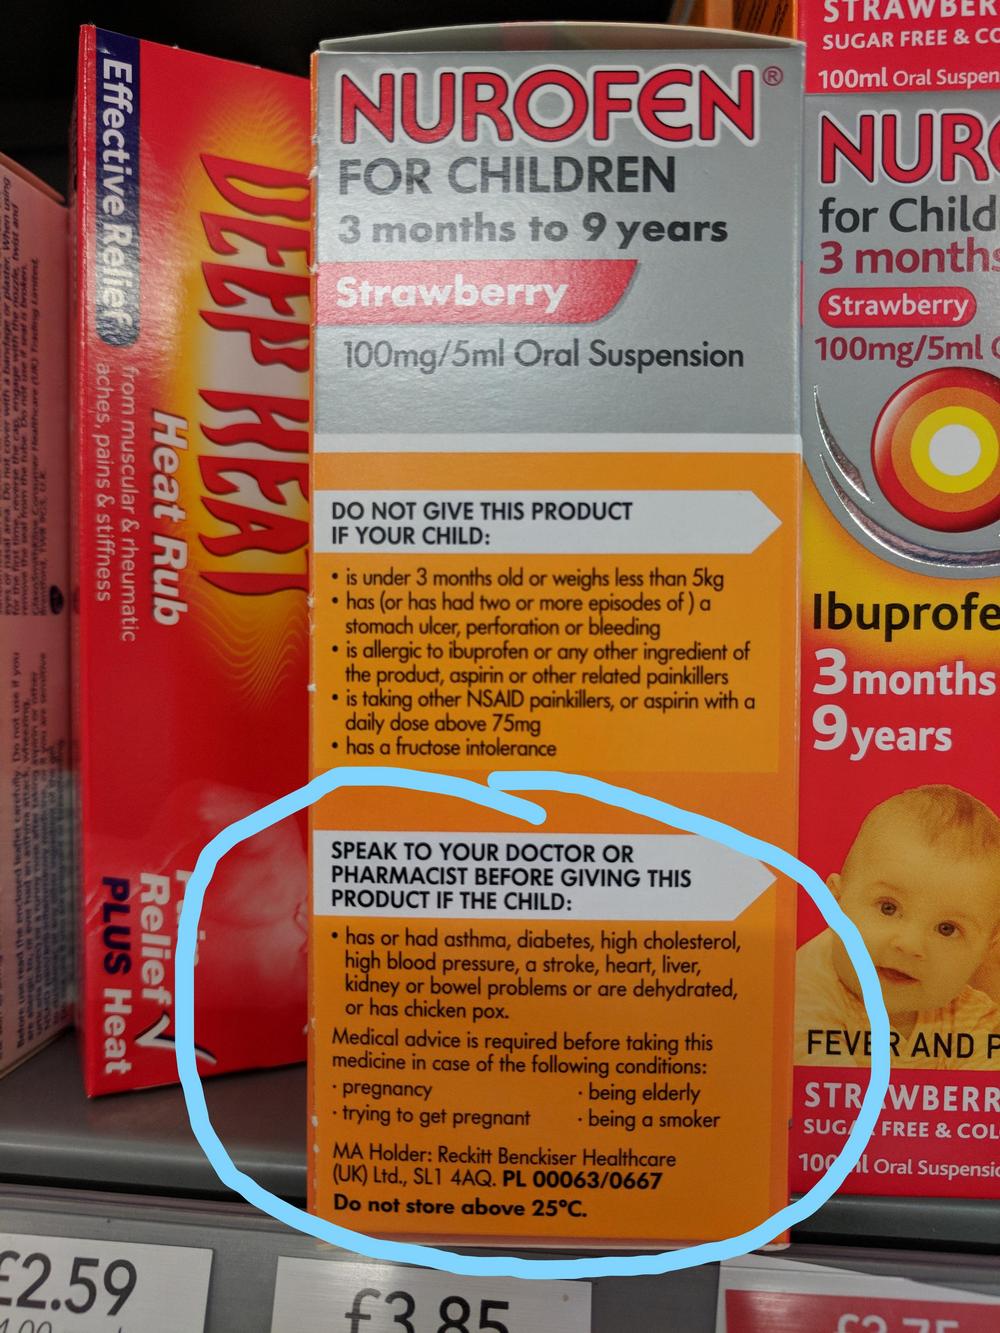 A box of Nurofen for Children, a strawberry-flavored oral suspension for kids aged 3 months to 9 years, with a concentration of 100mg/5ml.